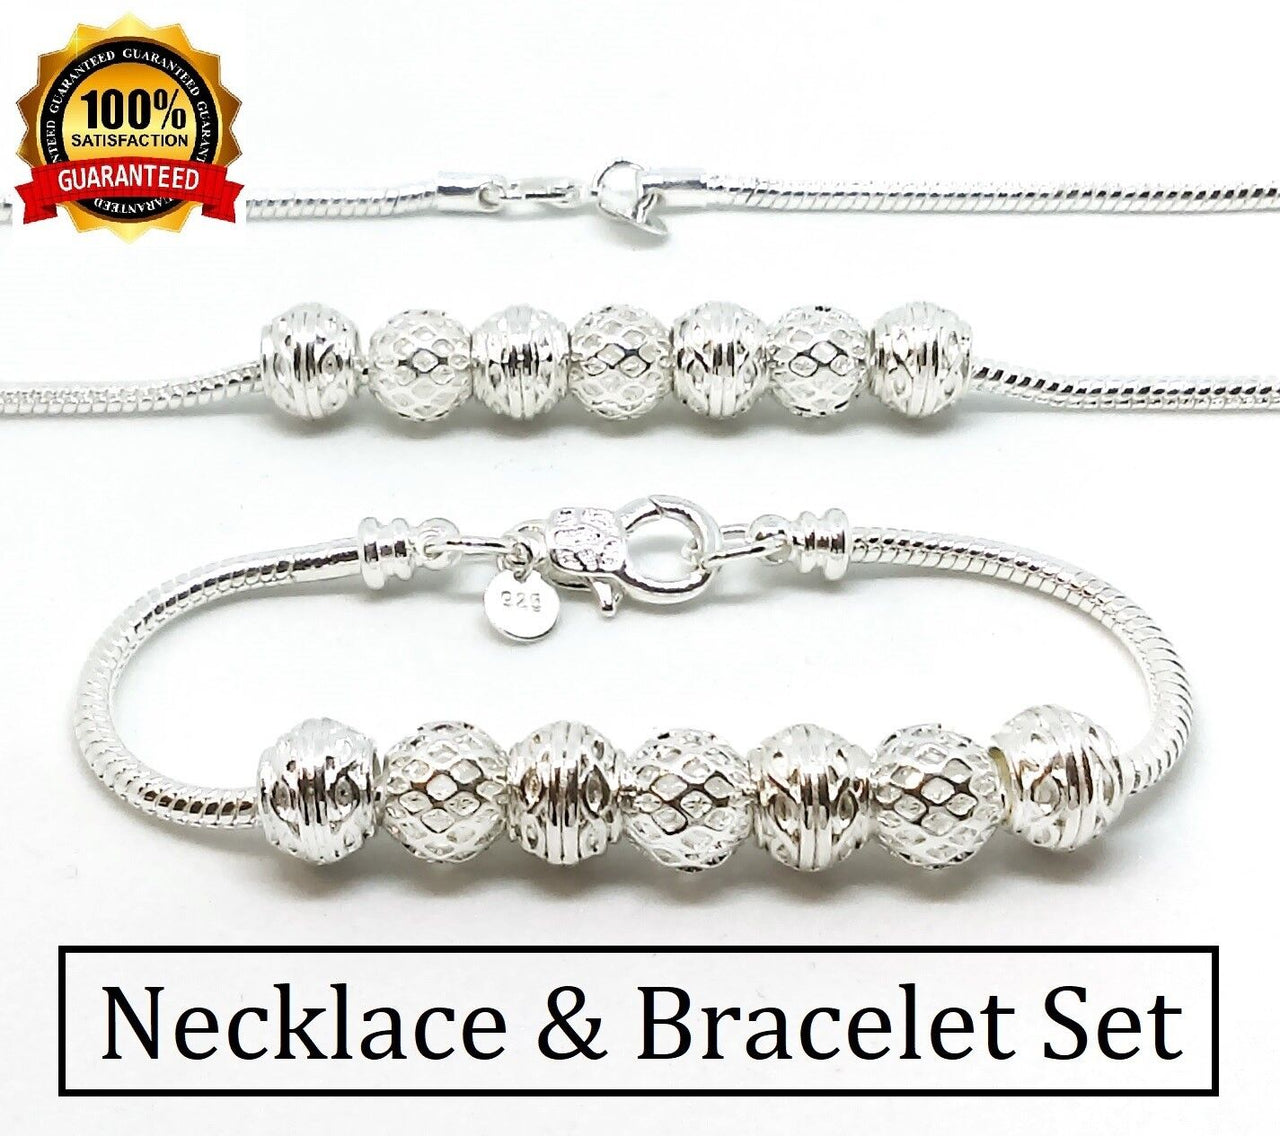 925 Sterling Silver Snake Chain 18" Necklace and Sterling Beads Bracelet Set